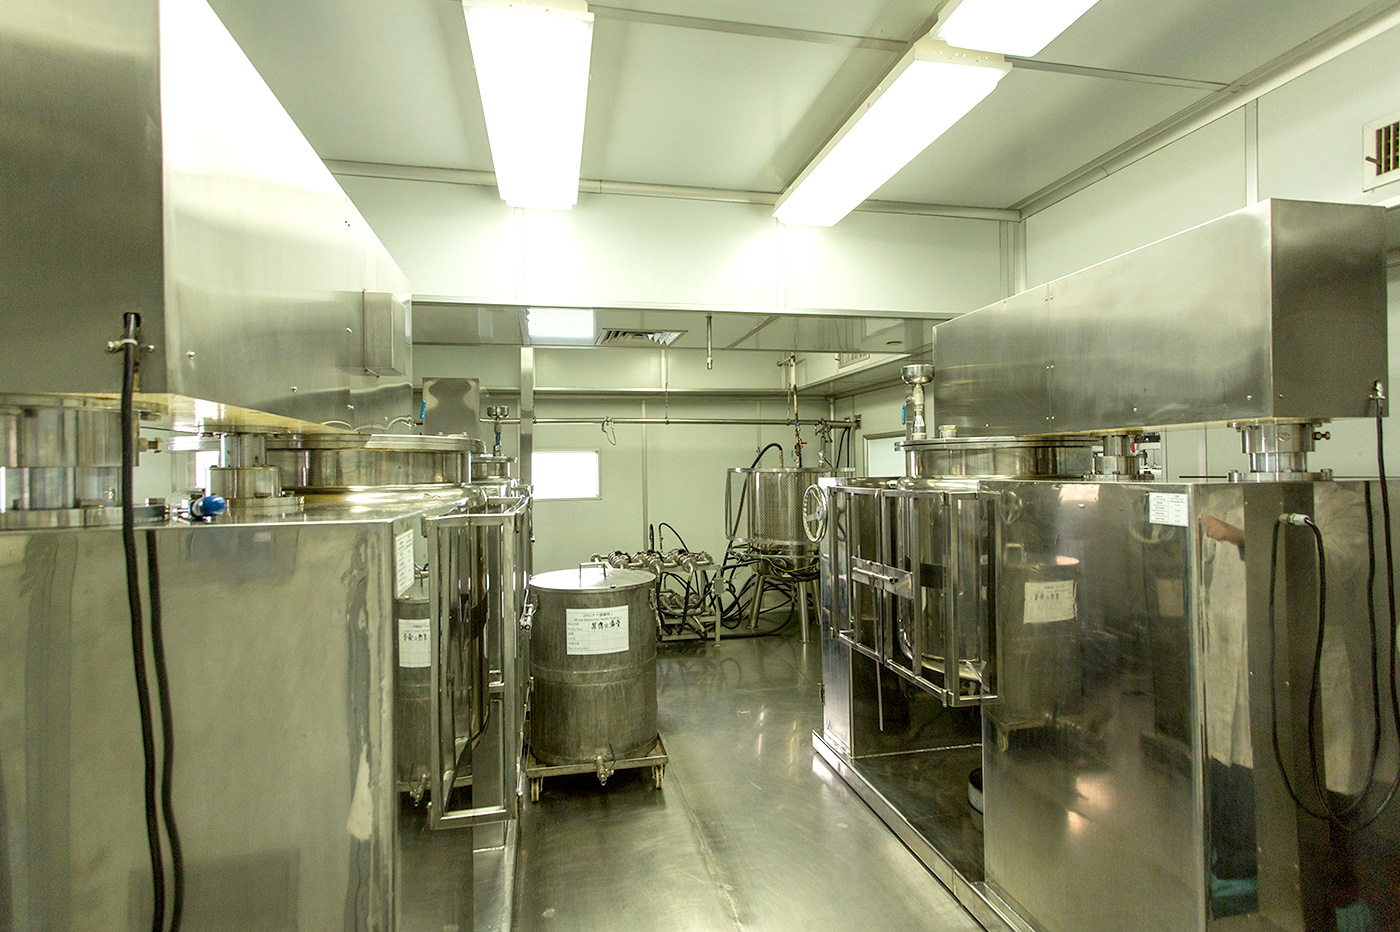 Ingredients are processed in the manufacturing room into well-mixed liquid